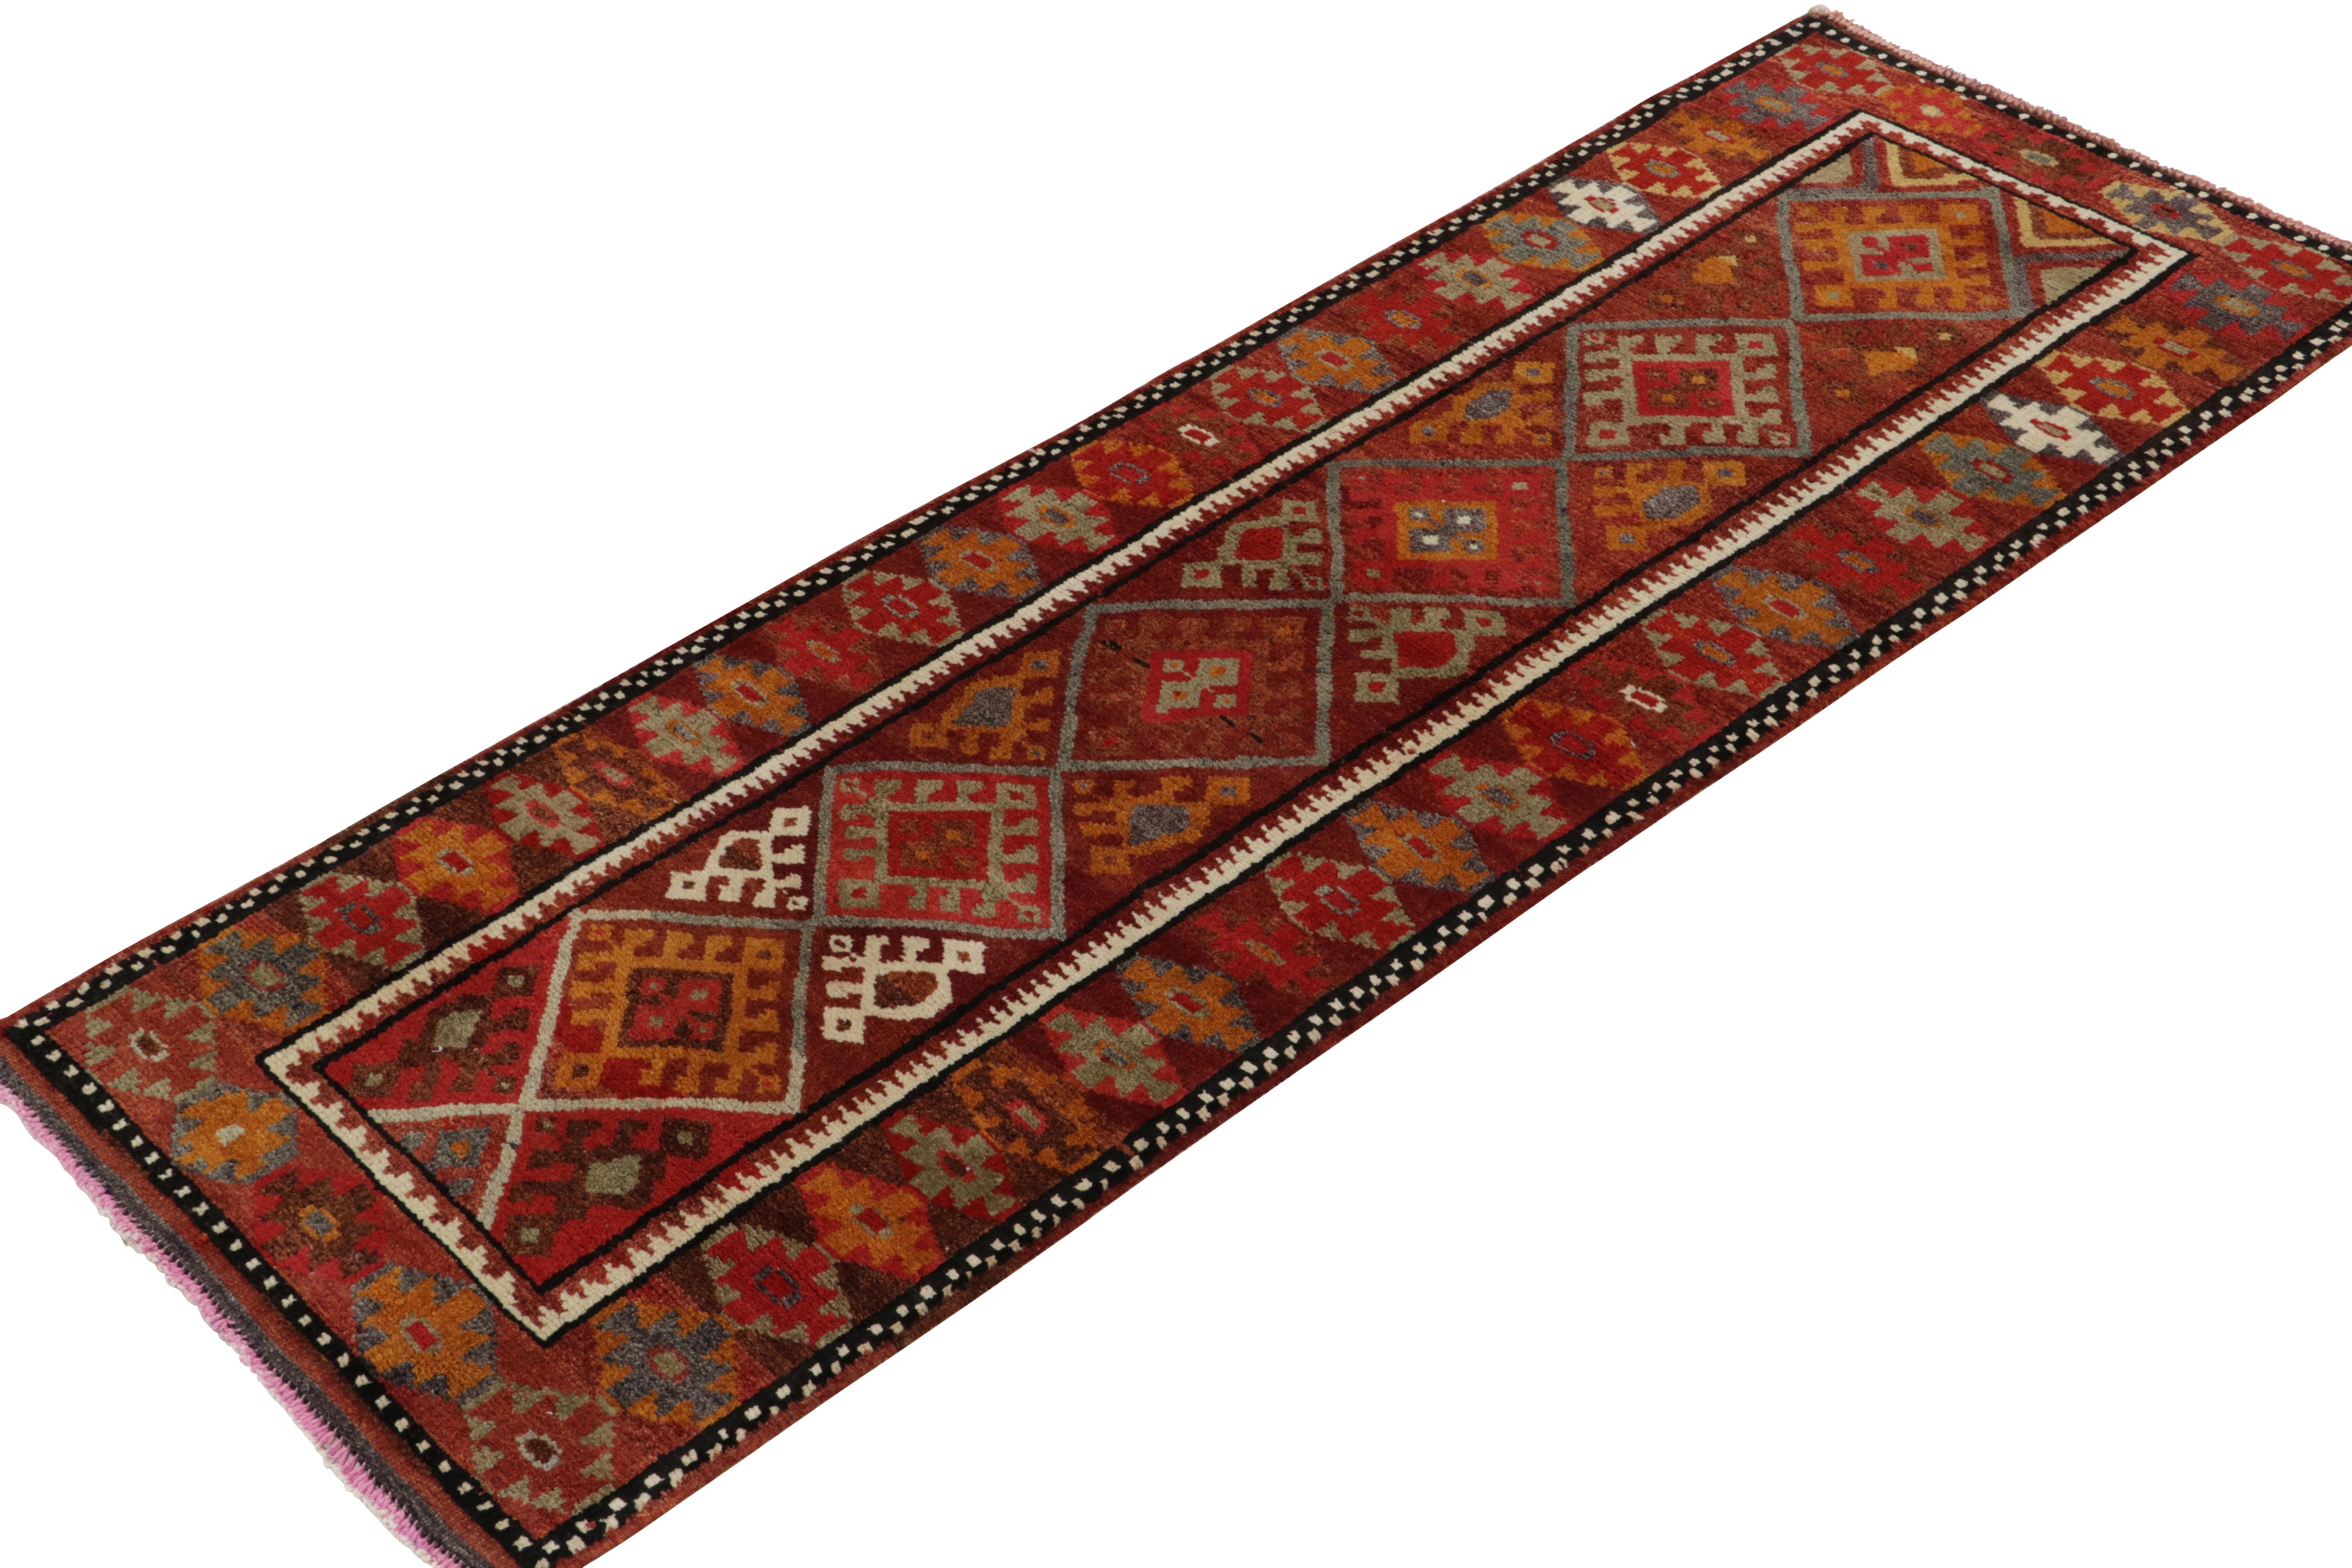 From R&K Principal Josh Nazmiyal’s latest acquisitions, a distinct vintage runner originating from Turkey circa 1950-1960. 

On the Design: The symmetric geometric design features traditional motifs encased in diamond patterns continuing from end